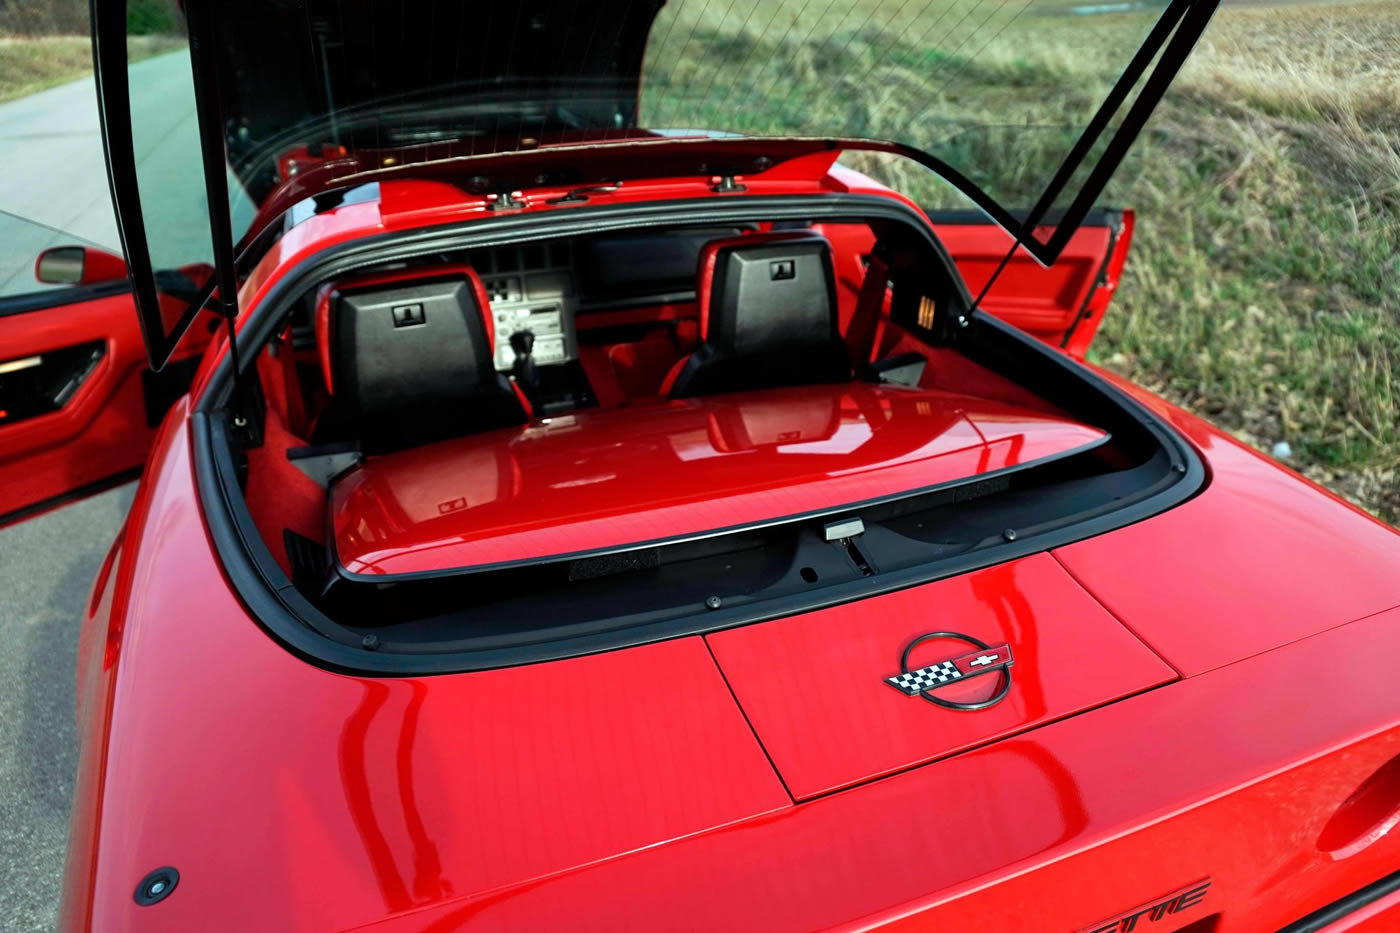 1989 Corvette Coupe in Bright Red with Red Interior